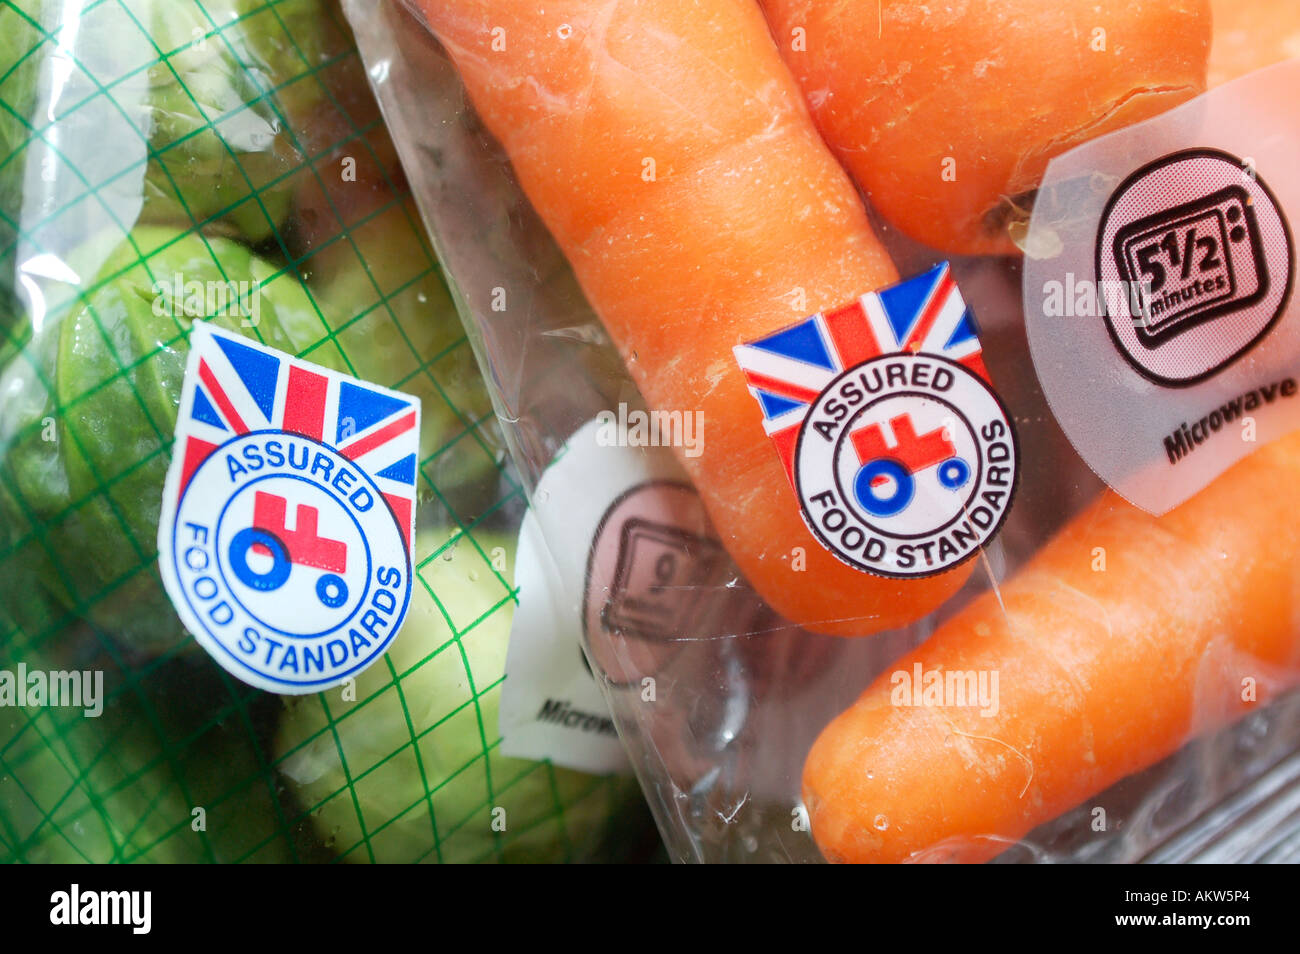 British Assured Food Standards label on a packet of fresh vegetables in the UK. Stock Photo